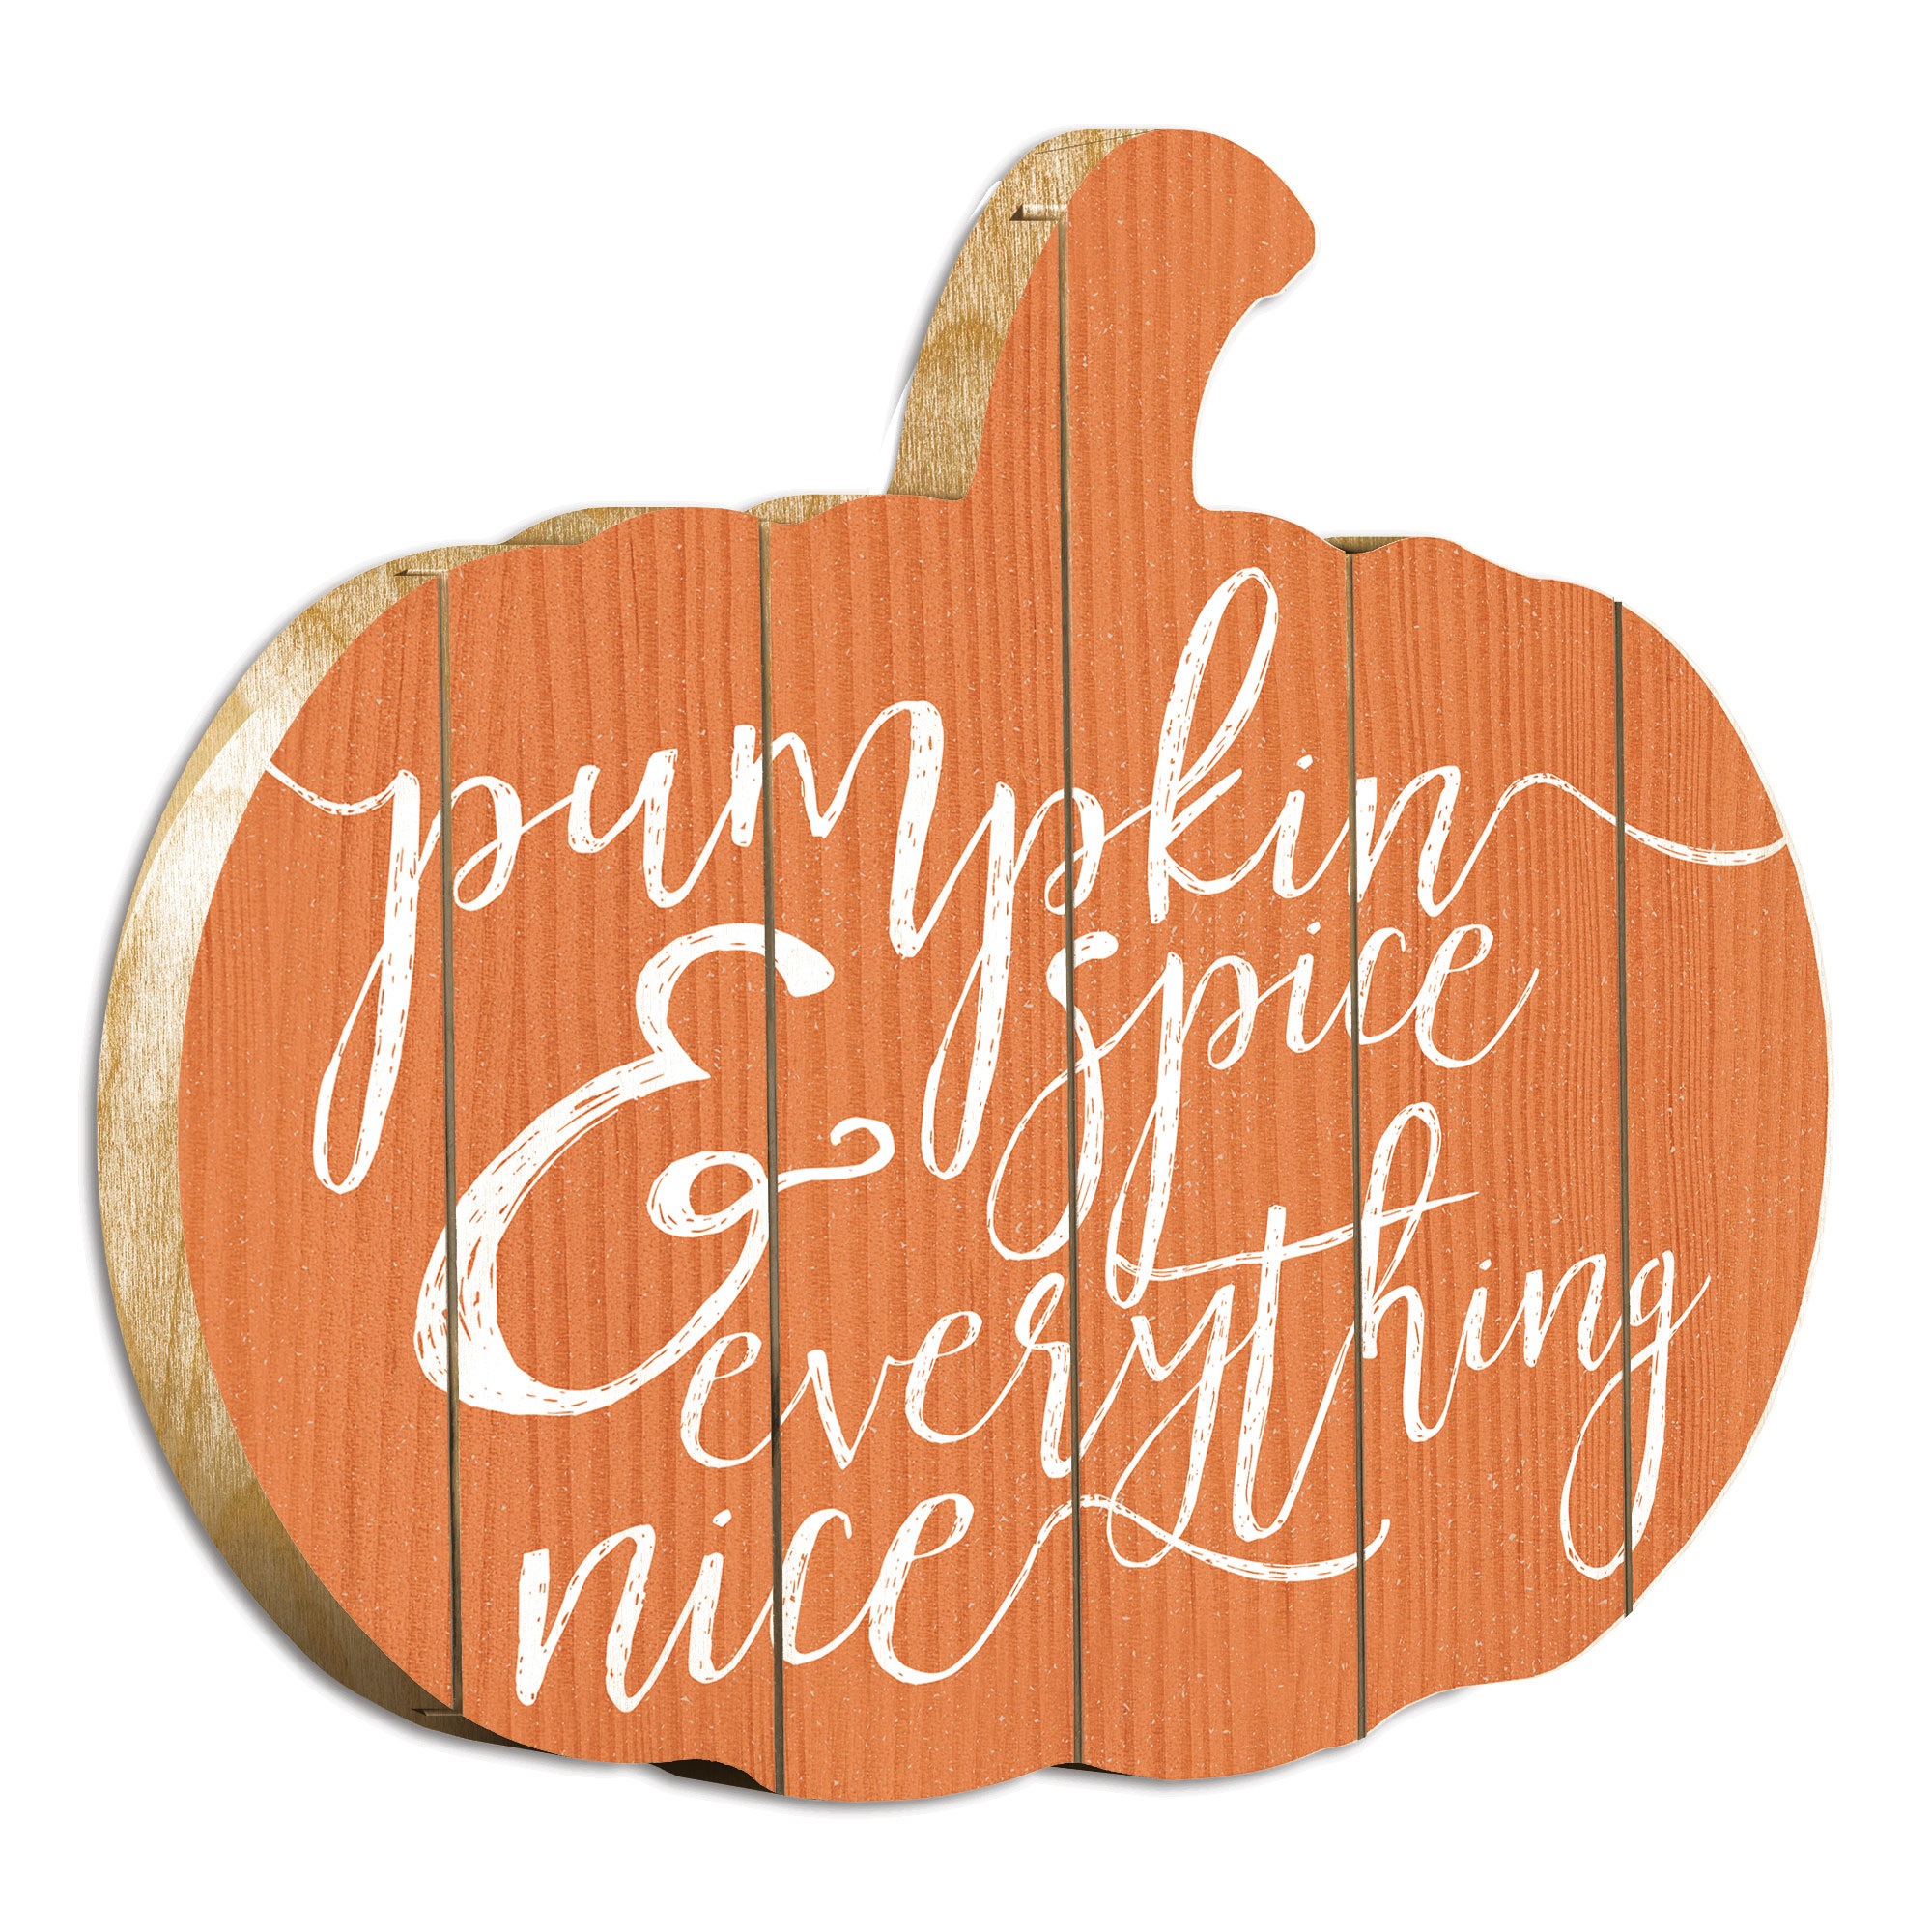 TrendyDecor4U "Pumpkin and Spice" By Artisan Lux + Me Designs Printed on Wooden Pumpkin Wall Art